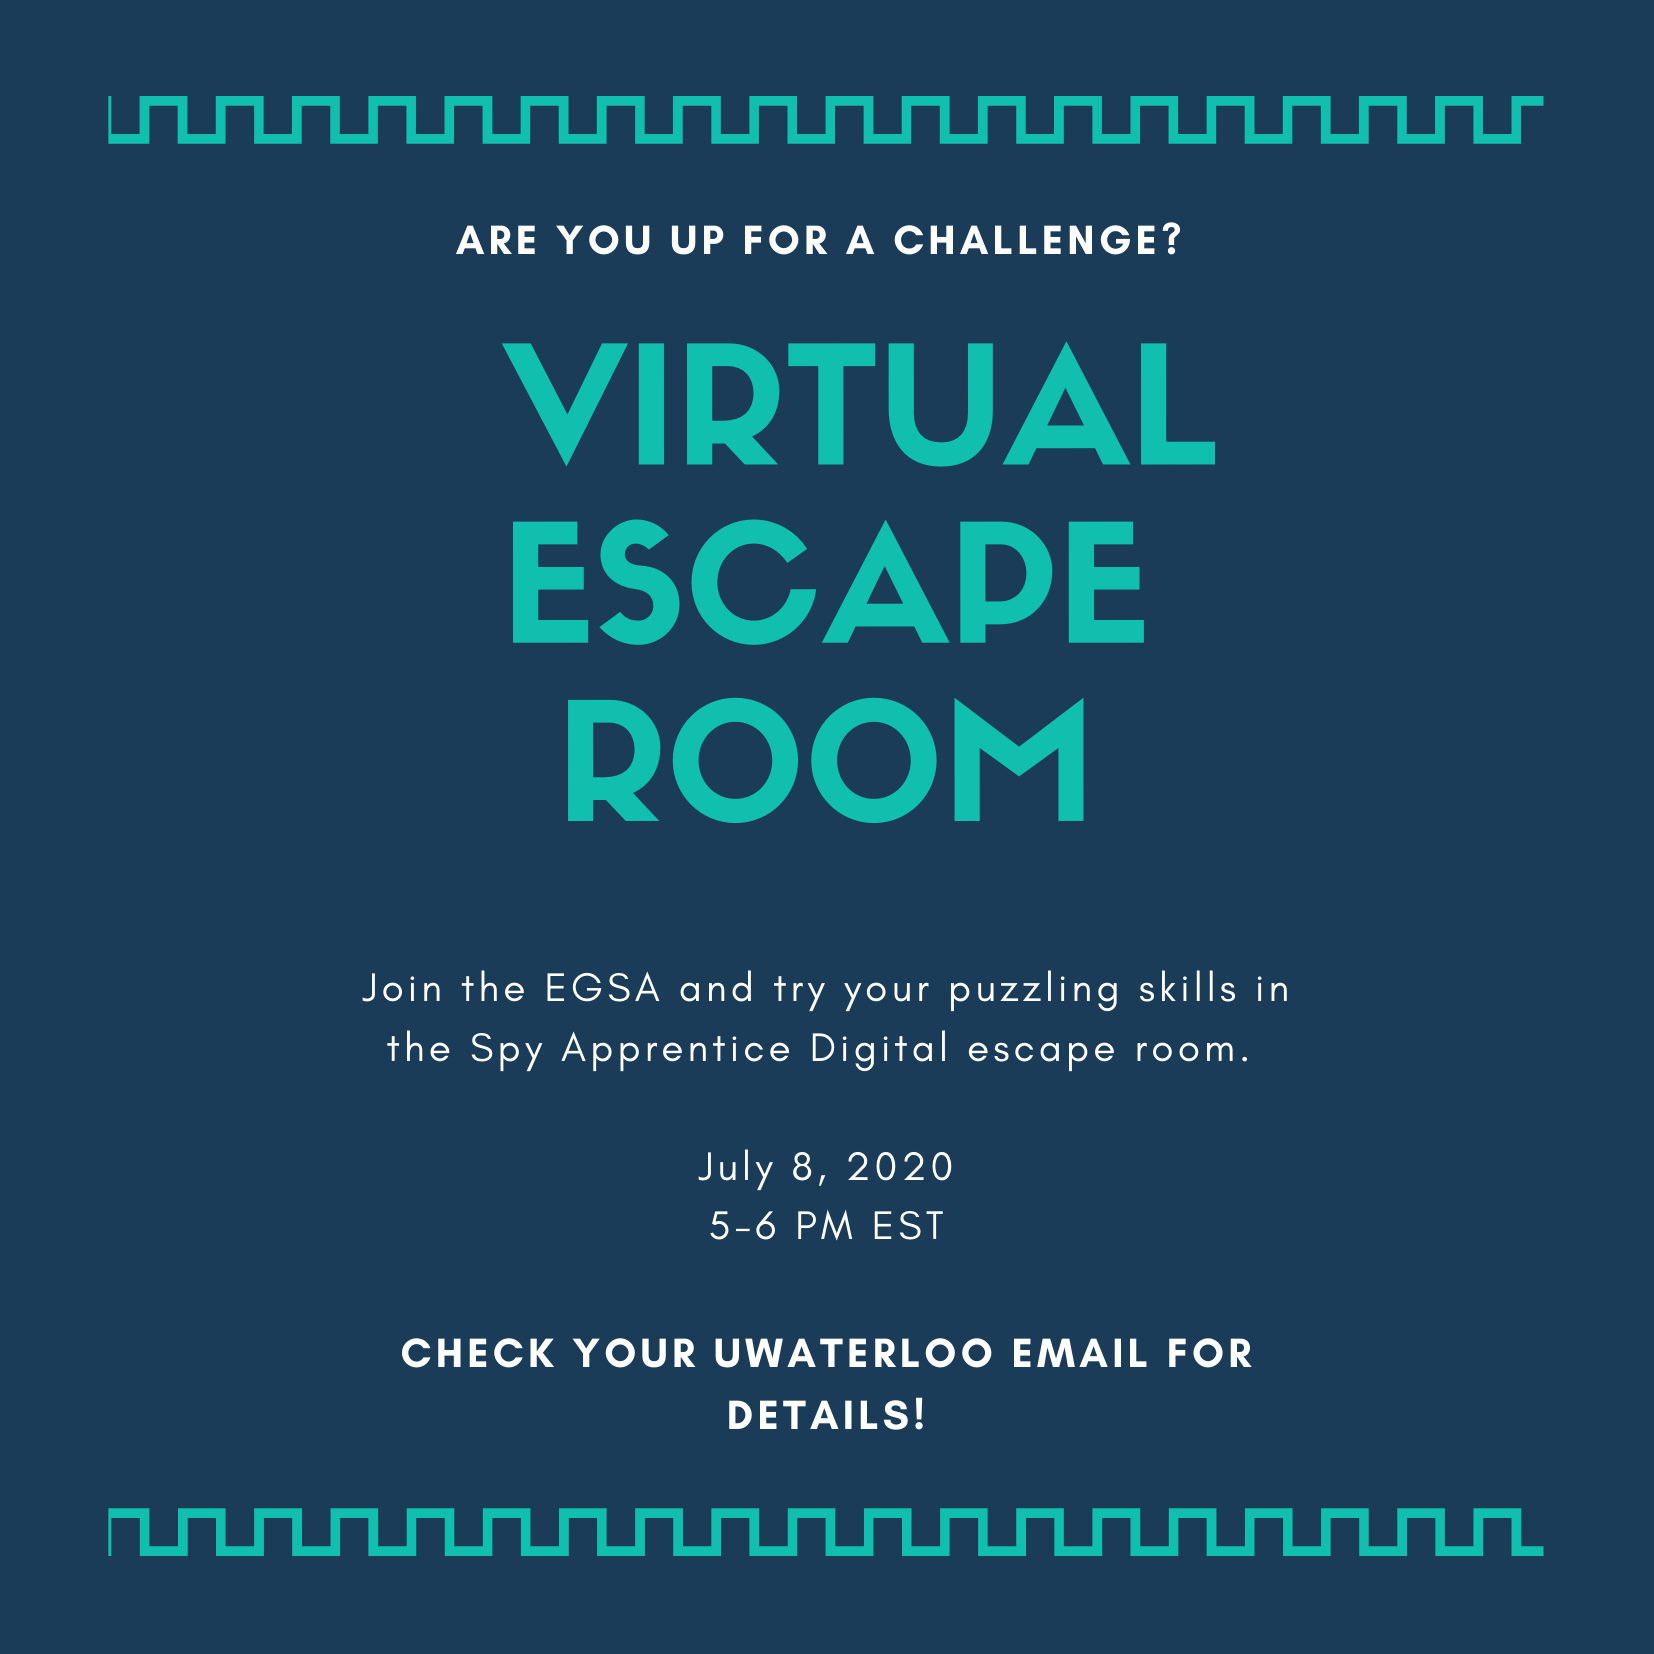 Blue and Teal Virtual Escape Room Infographic